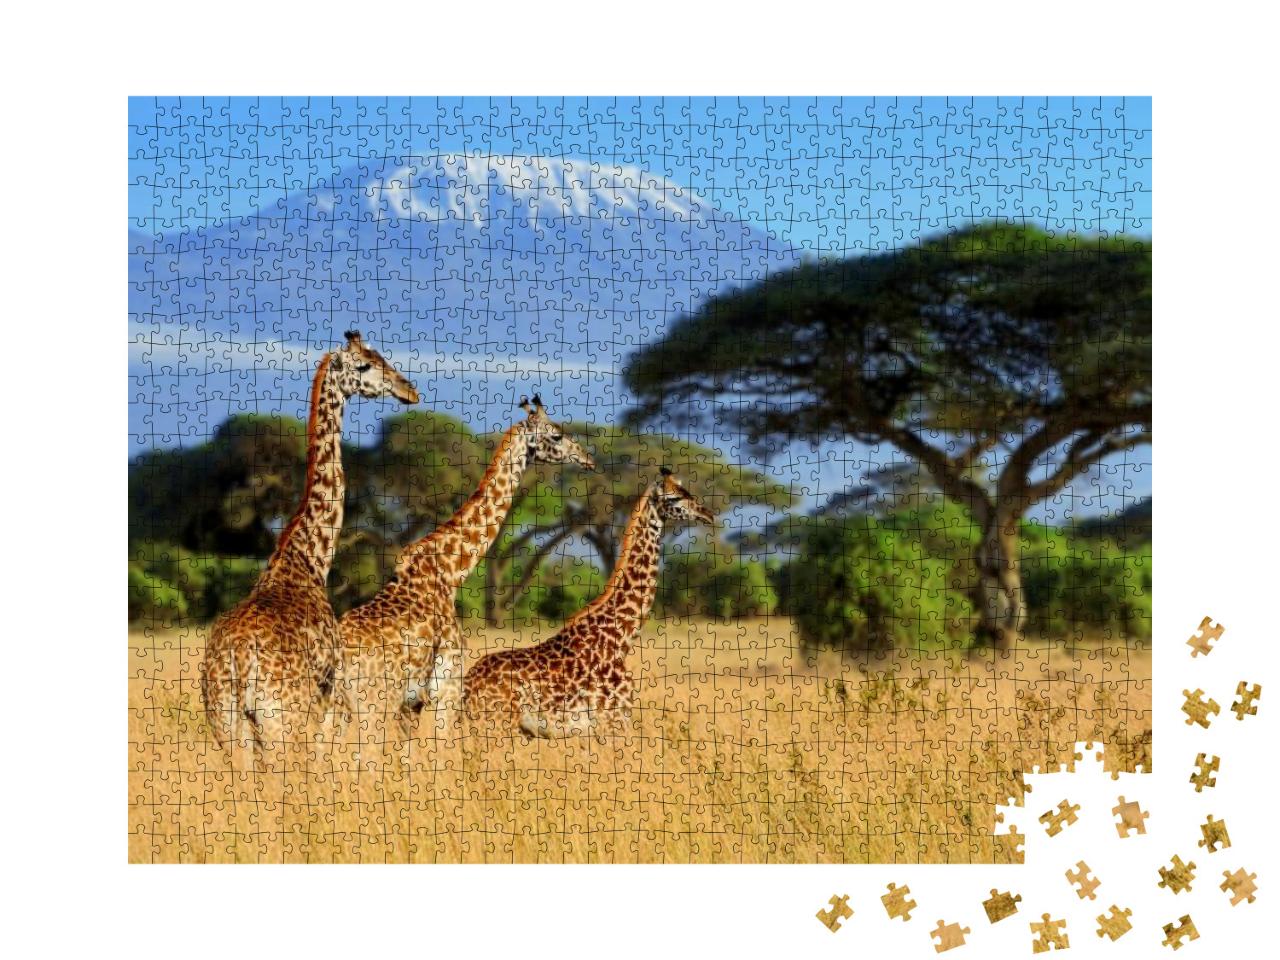 Three Giraffe on Kilimanjaro Mount Background in National... Jigsaw Puzzle with 1000 pieces